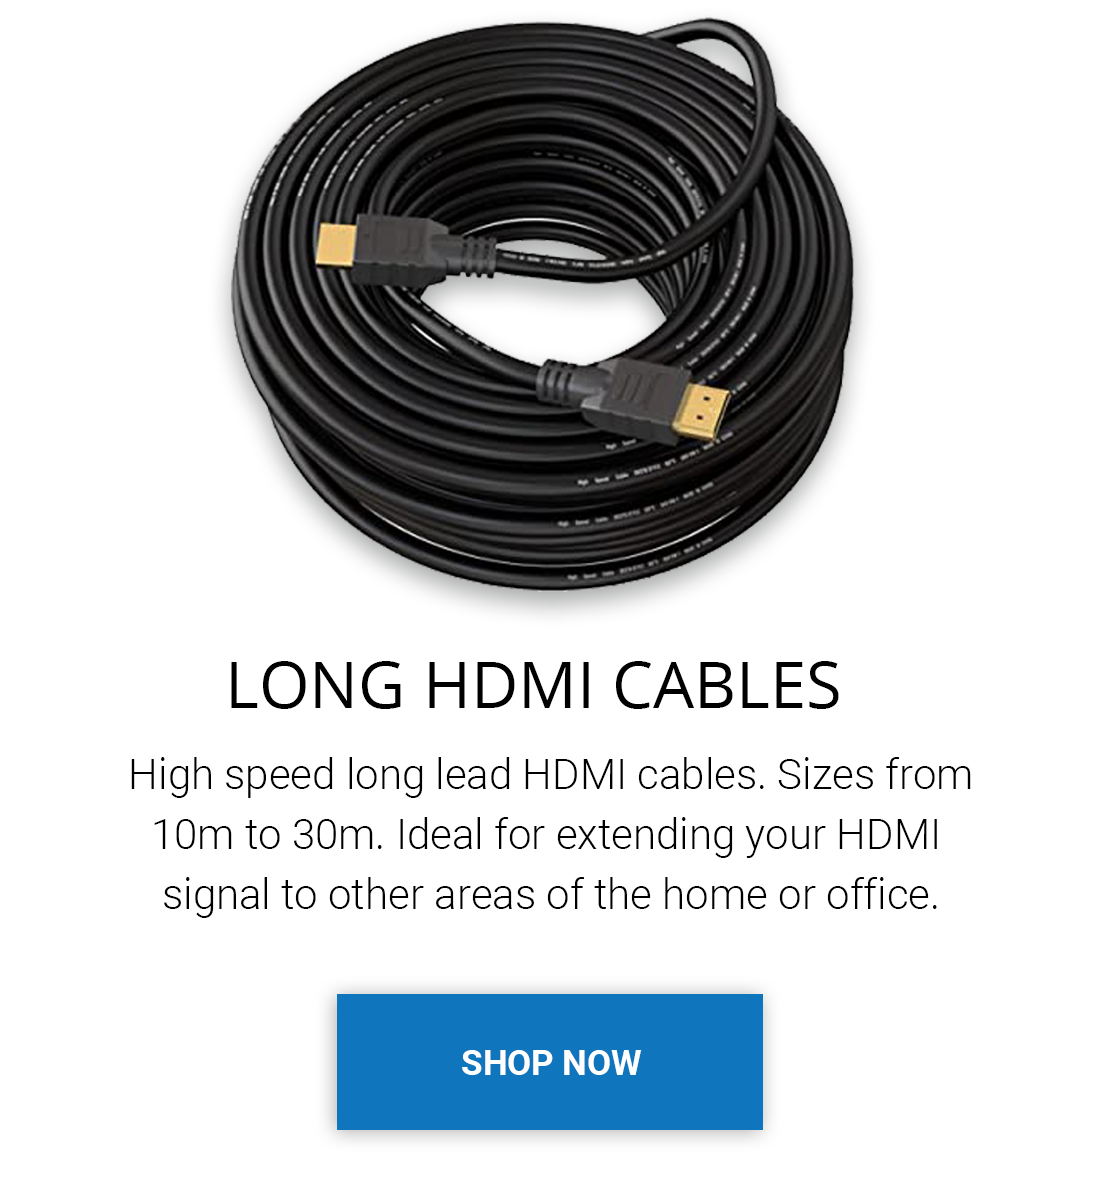 Long HDMI Cables. 20 meter hdmi cable. Long HDMI Leads for CCTV, Projectors, Sky TV, Virgin, OLED, PS4, Xbox One. 1080p Full HD